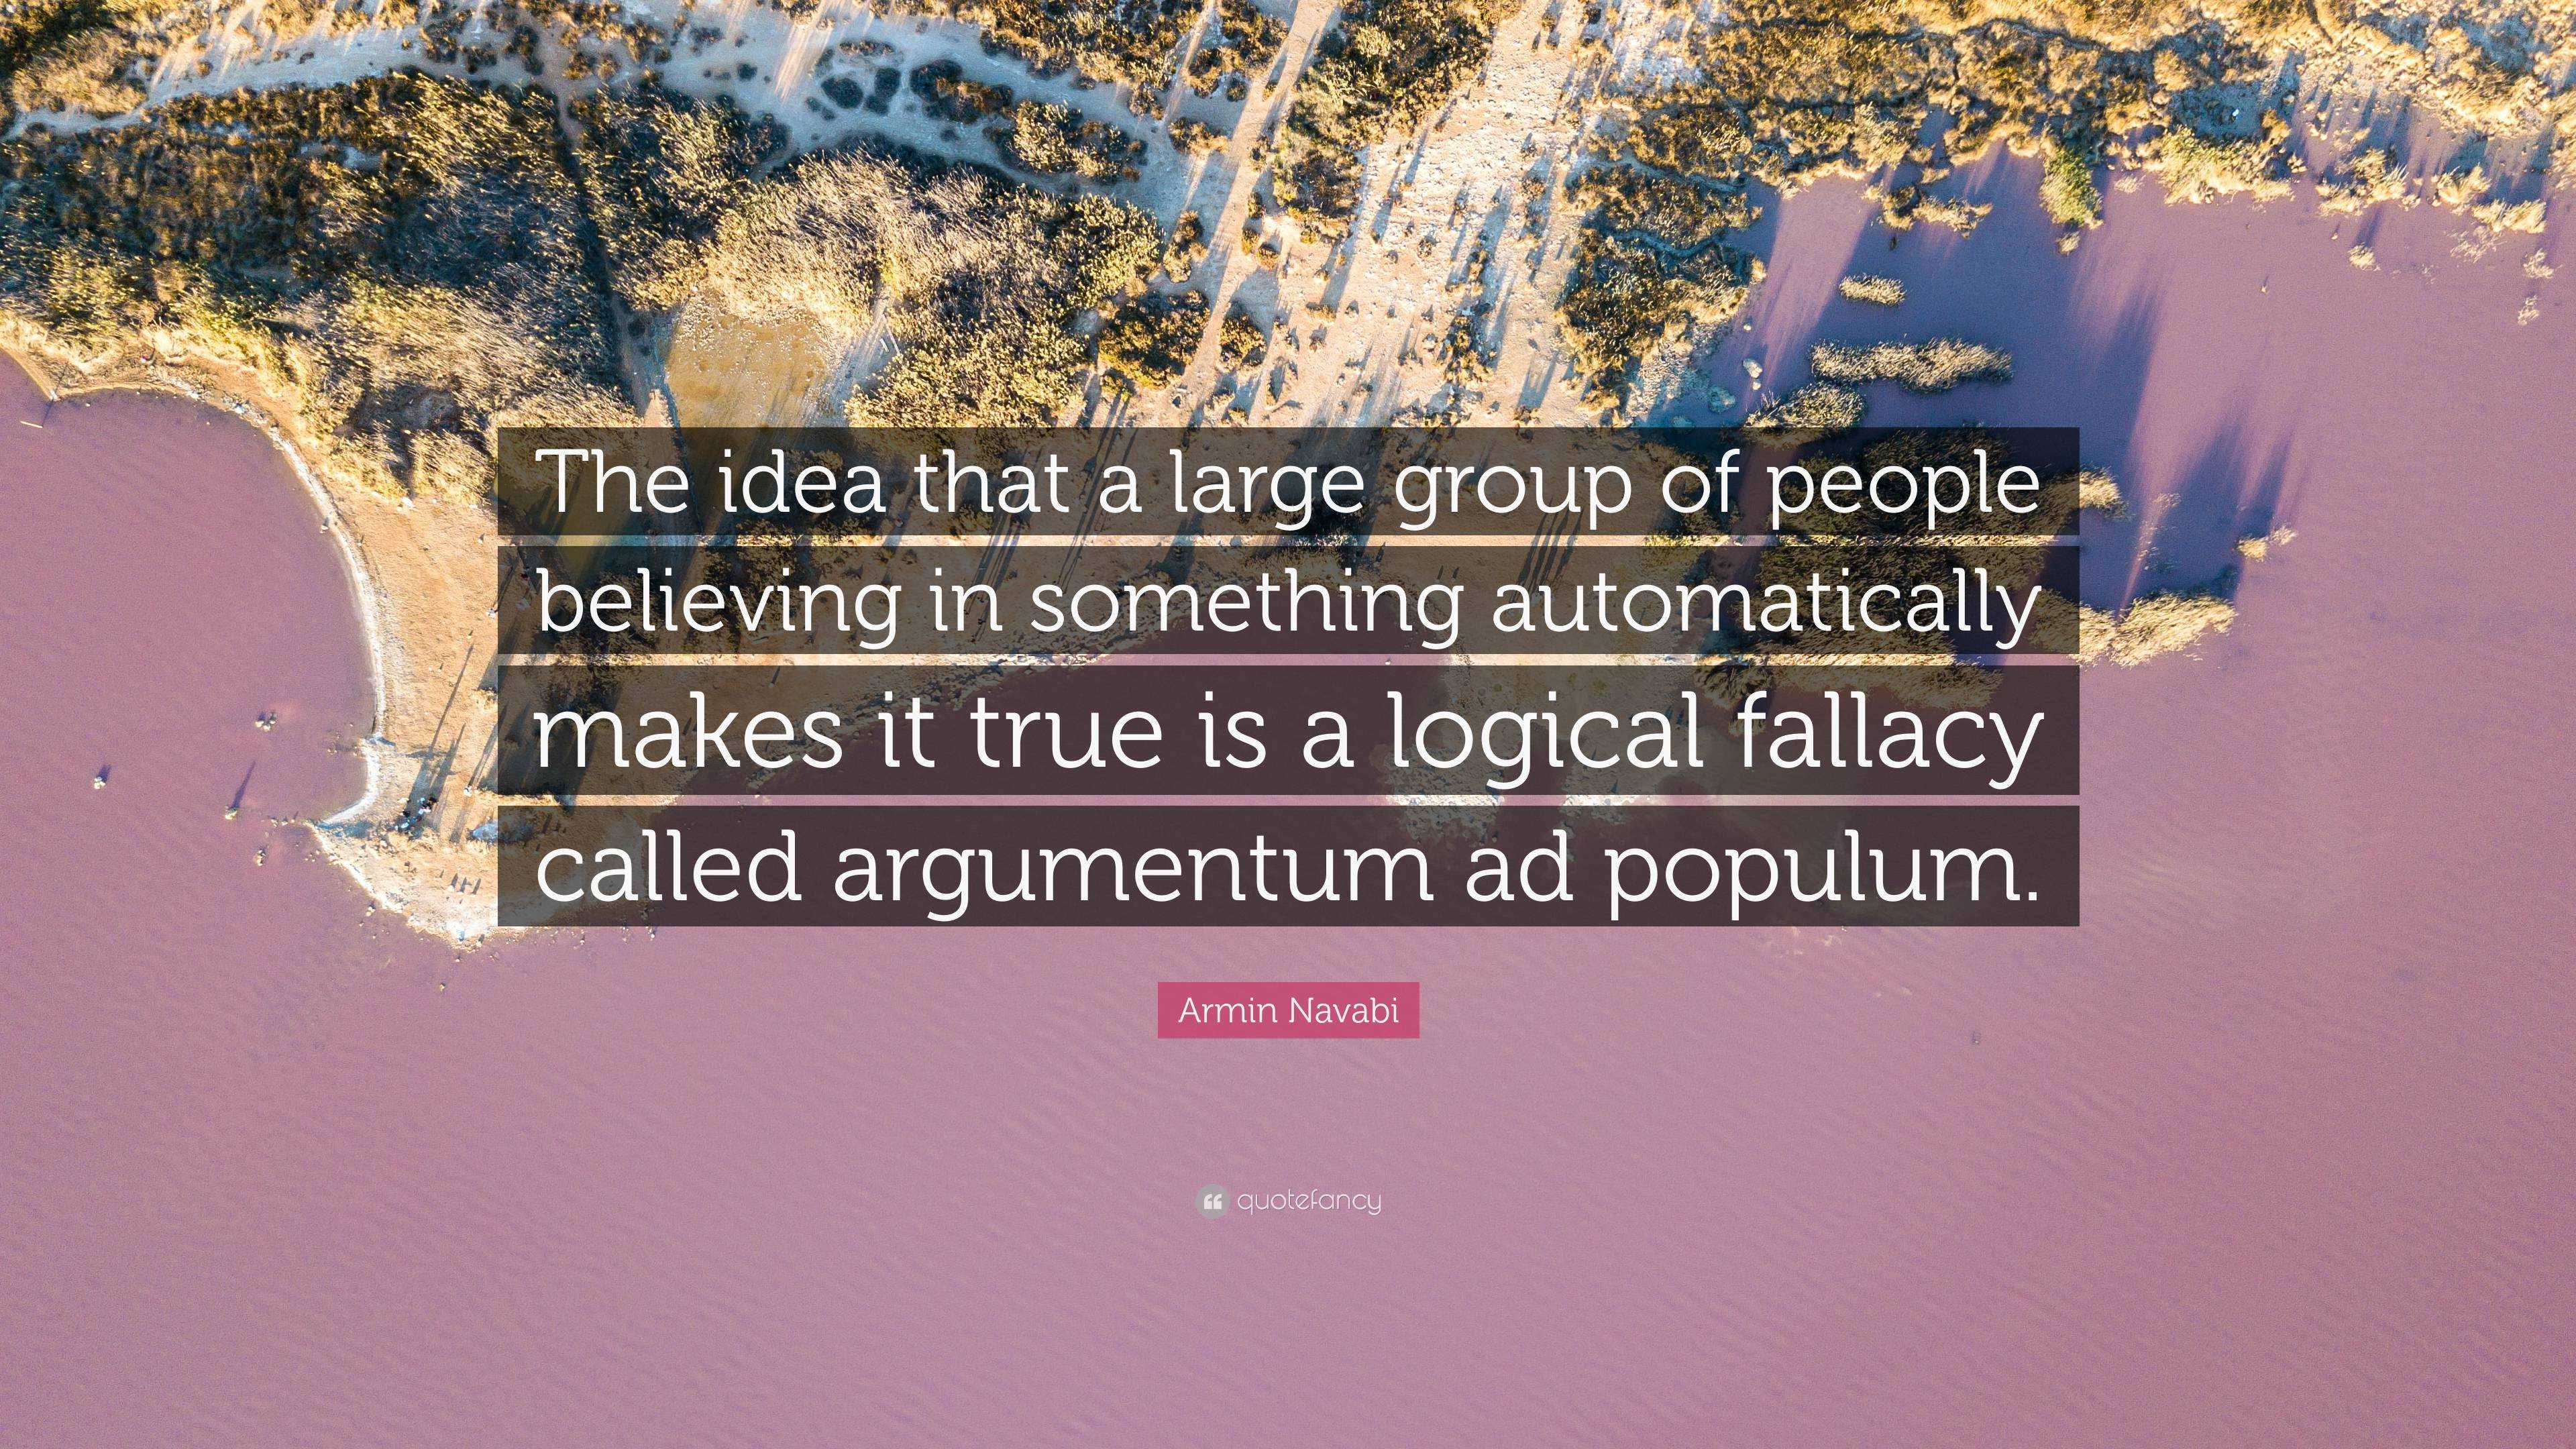 Populum logical fallacy argumentum ad Definition and